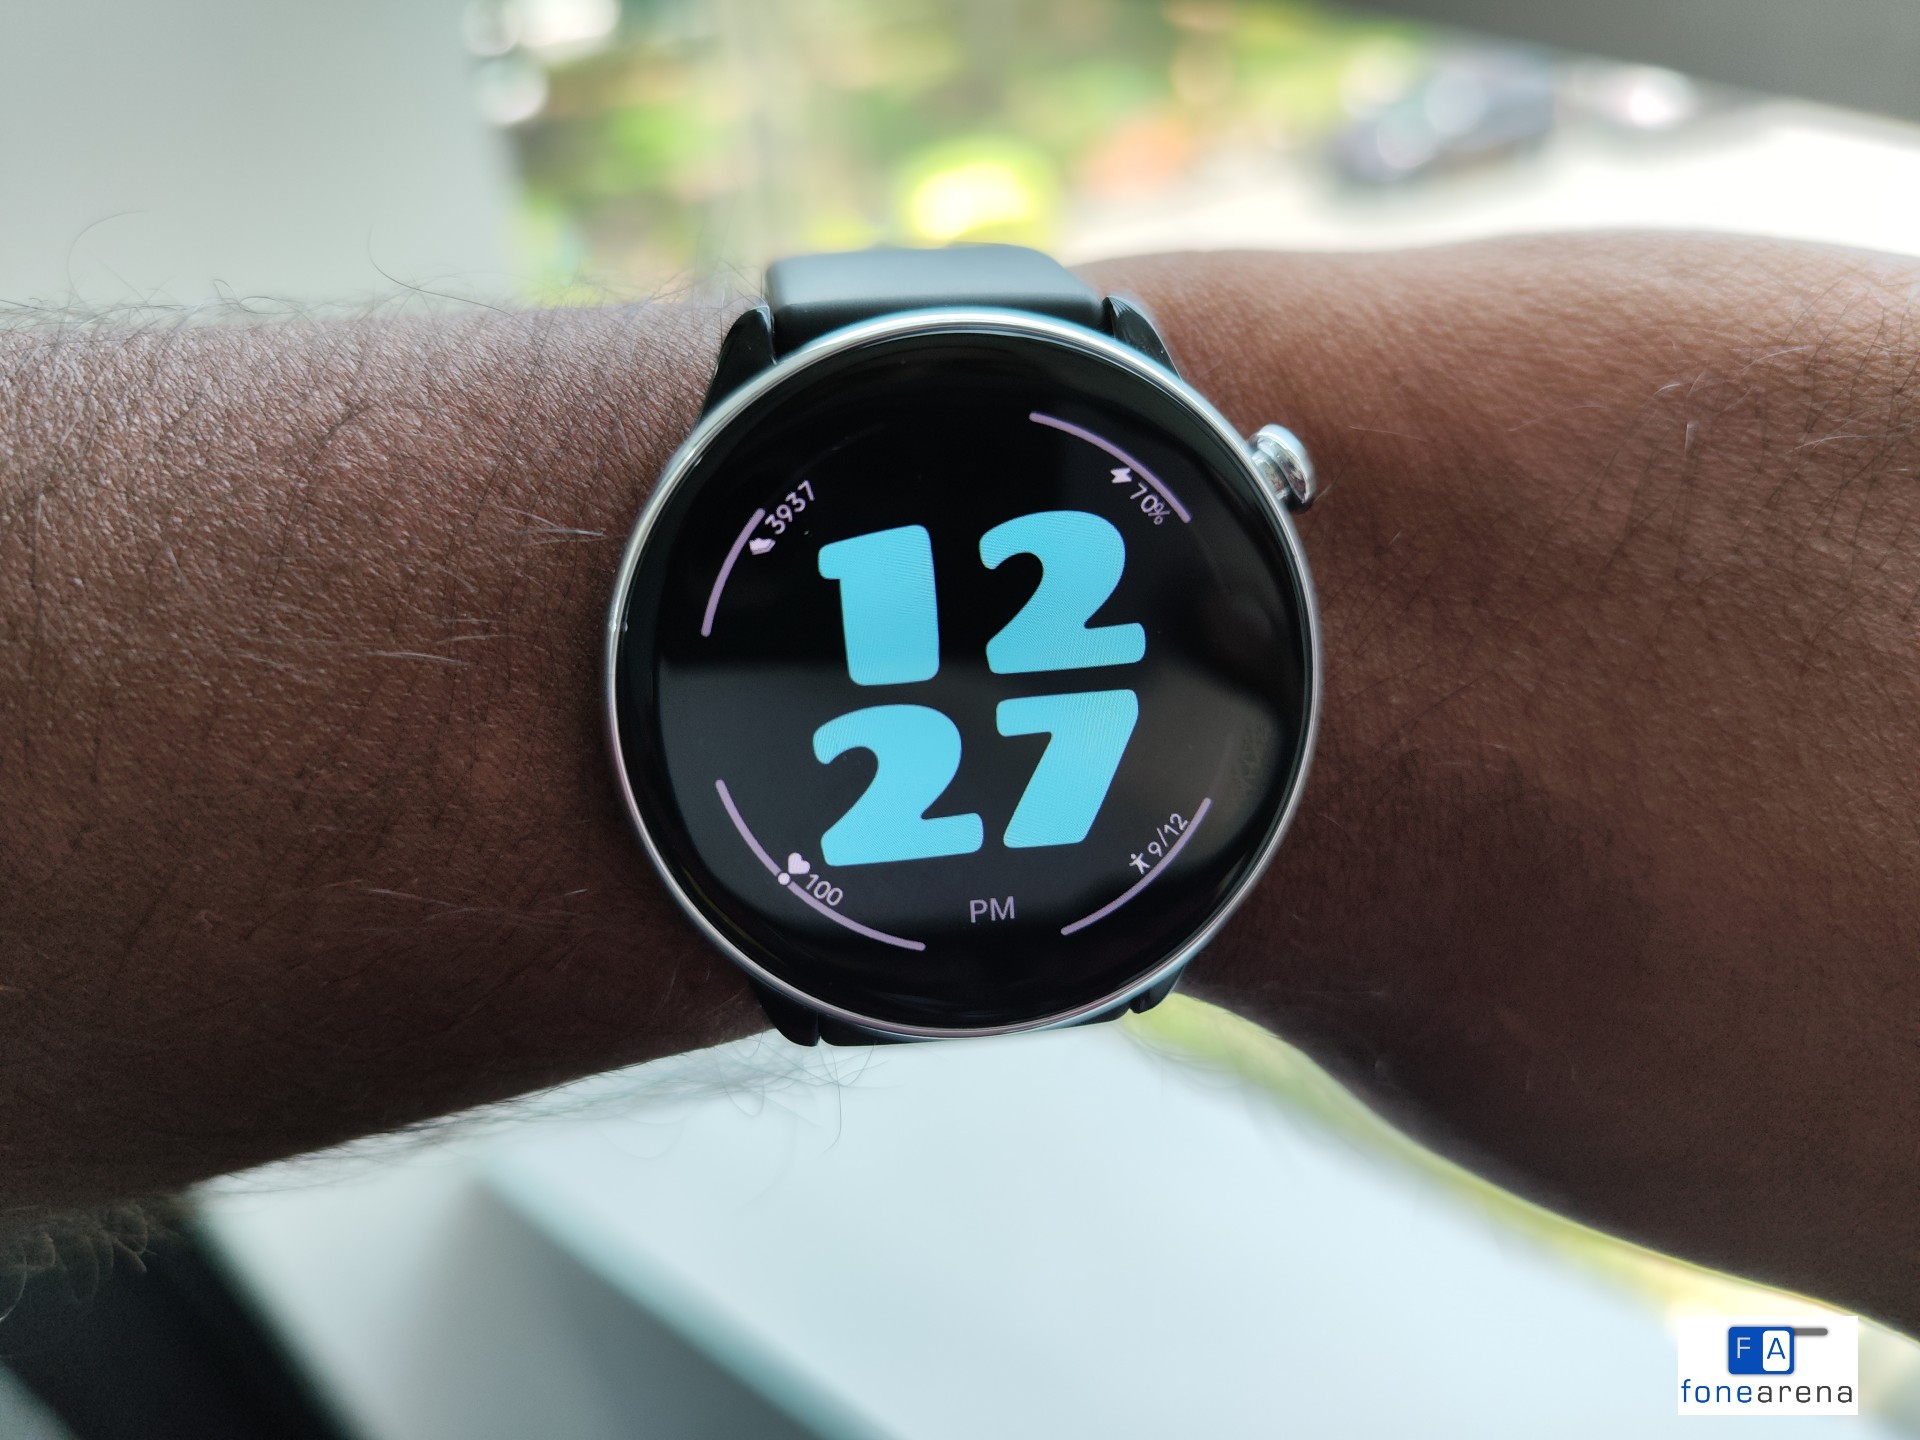 Amazfit GTR Mini smartwatch launched; price, specs to other features, take  a look